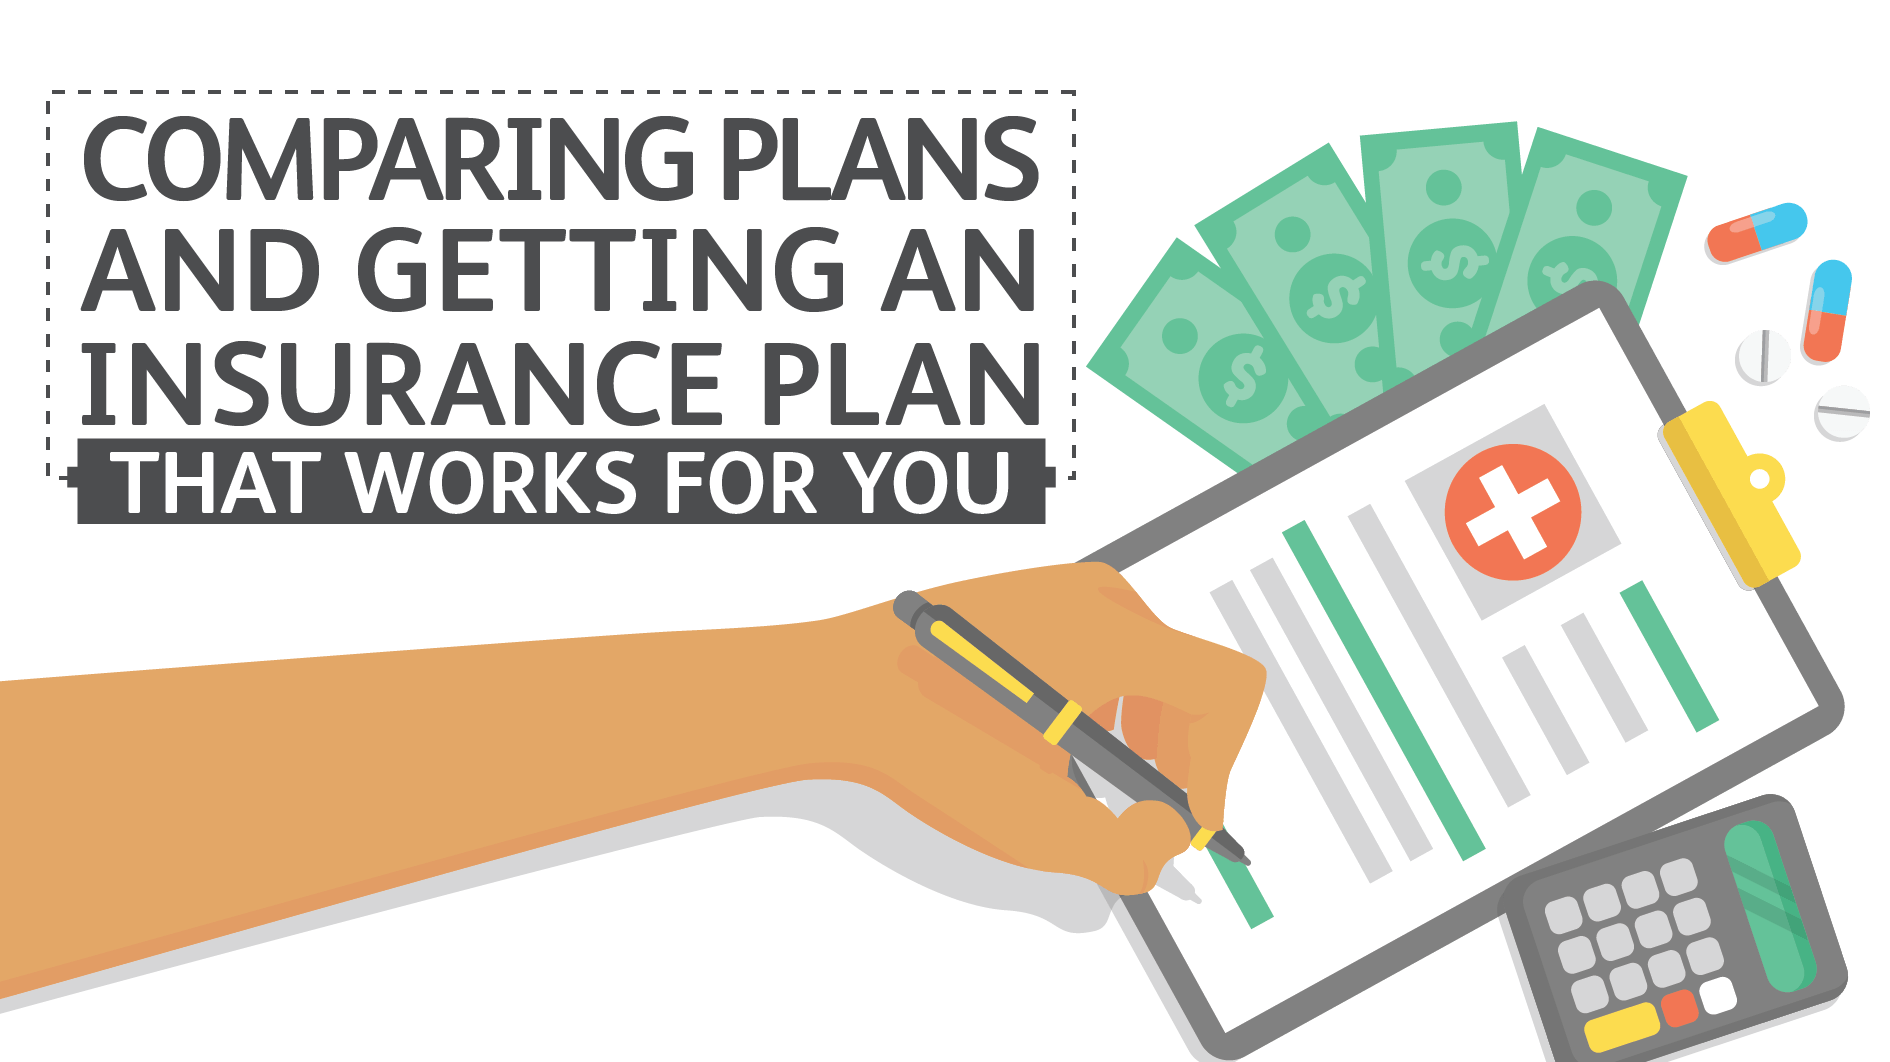 Comparing Plans and Getting an Insurance Plan that Works for You